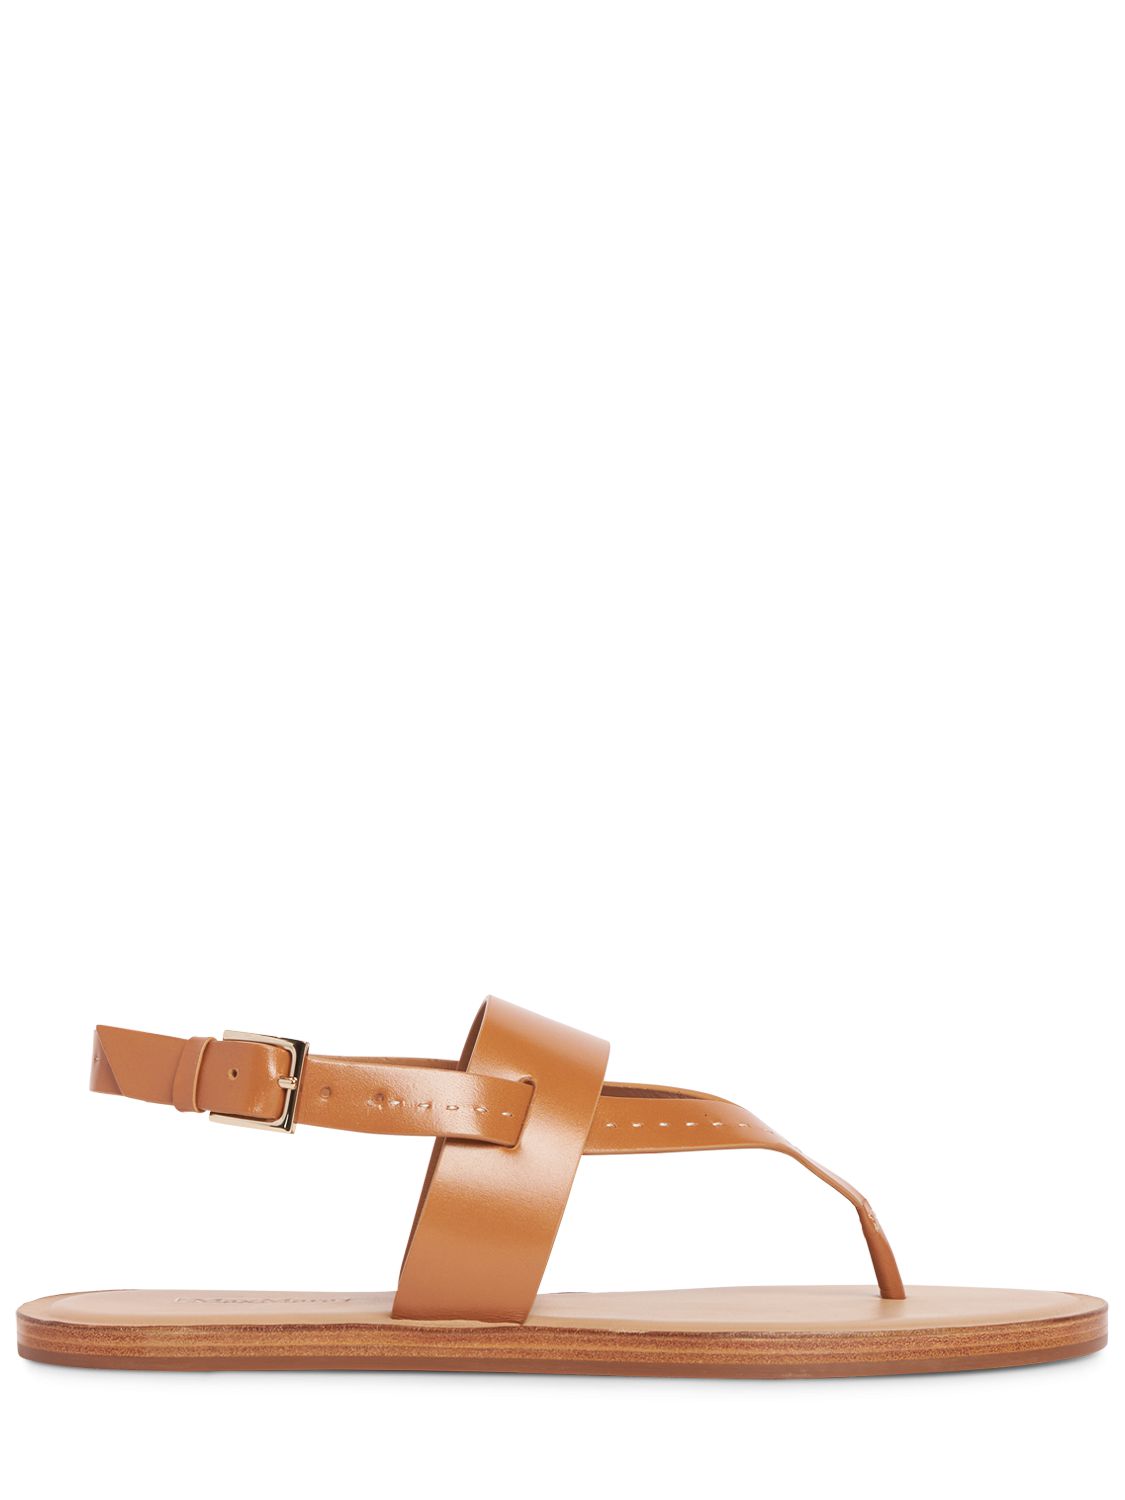 Max Mara 10mm Leather Thong Flat Shoes In Tan